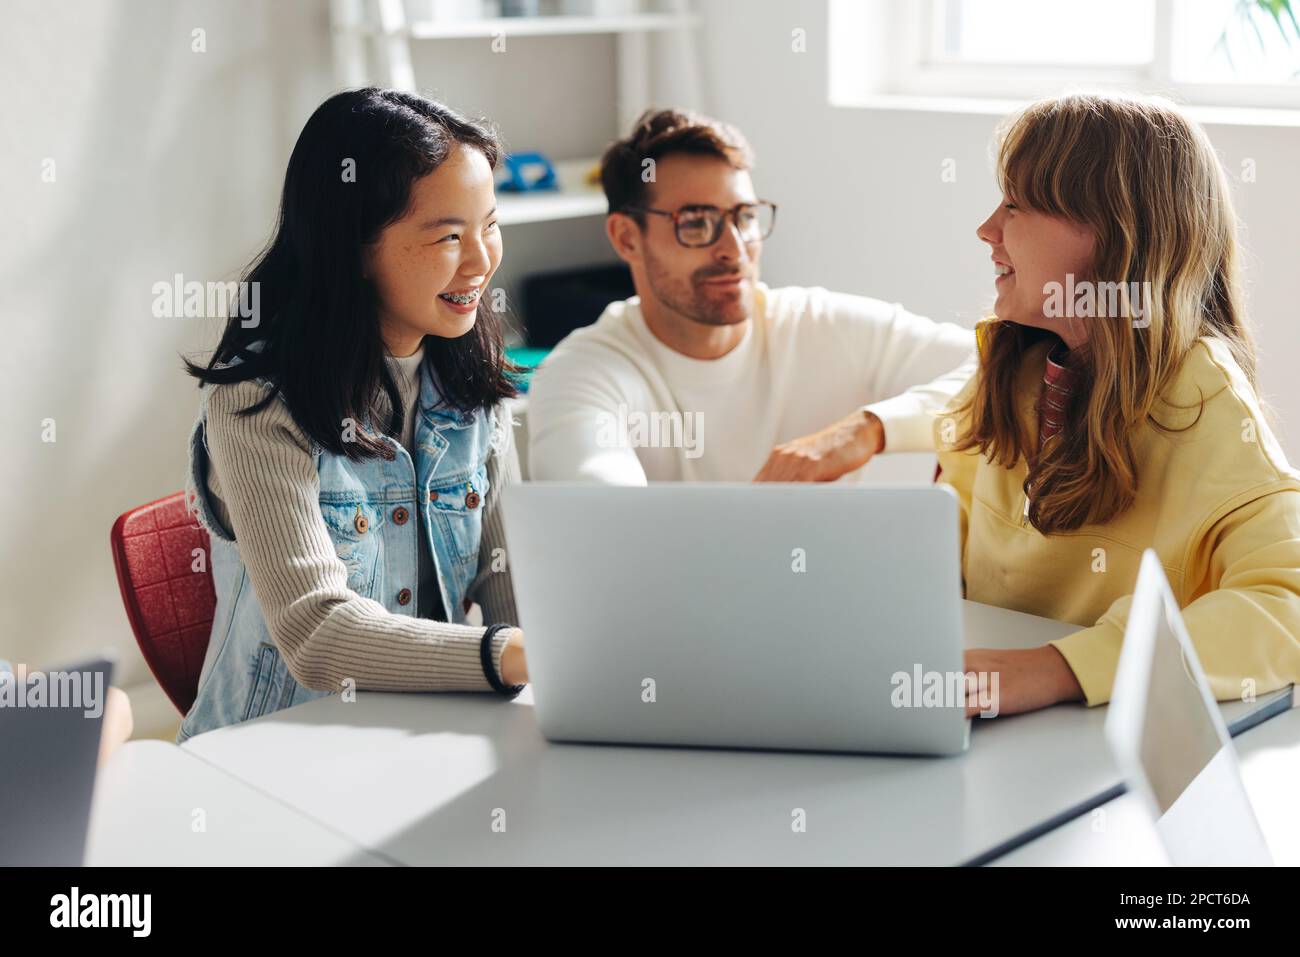 Tutor helping young female students with a computer science lesson in a classroom. Two young girls smiling and engaging with their teacher as they lea Stock Photo